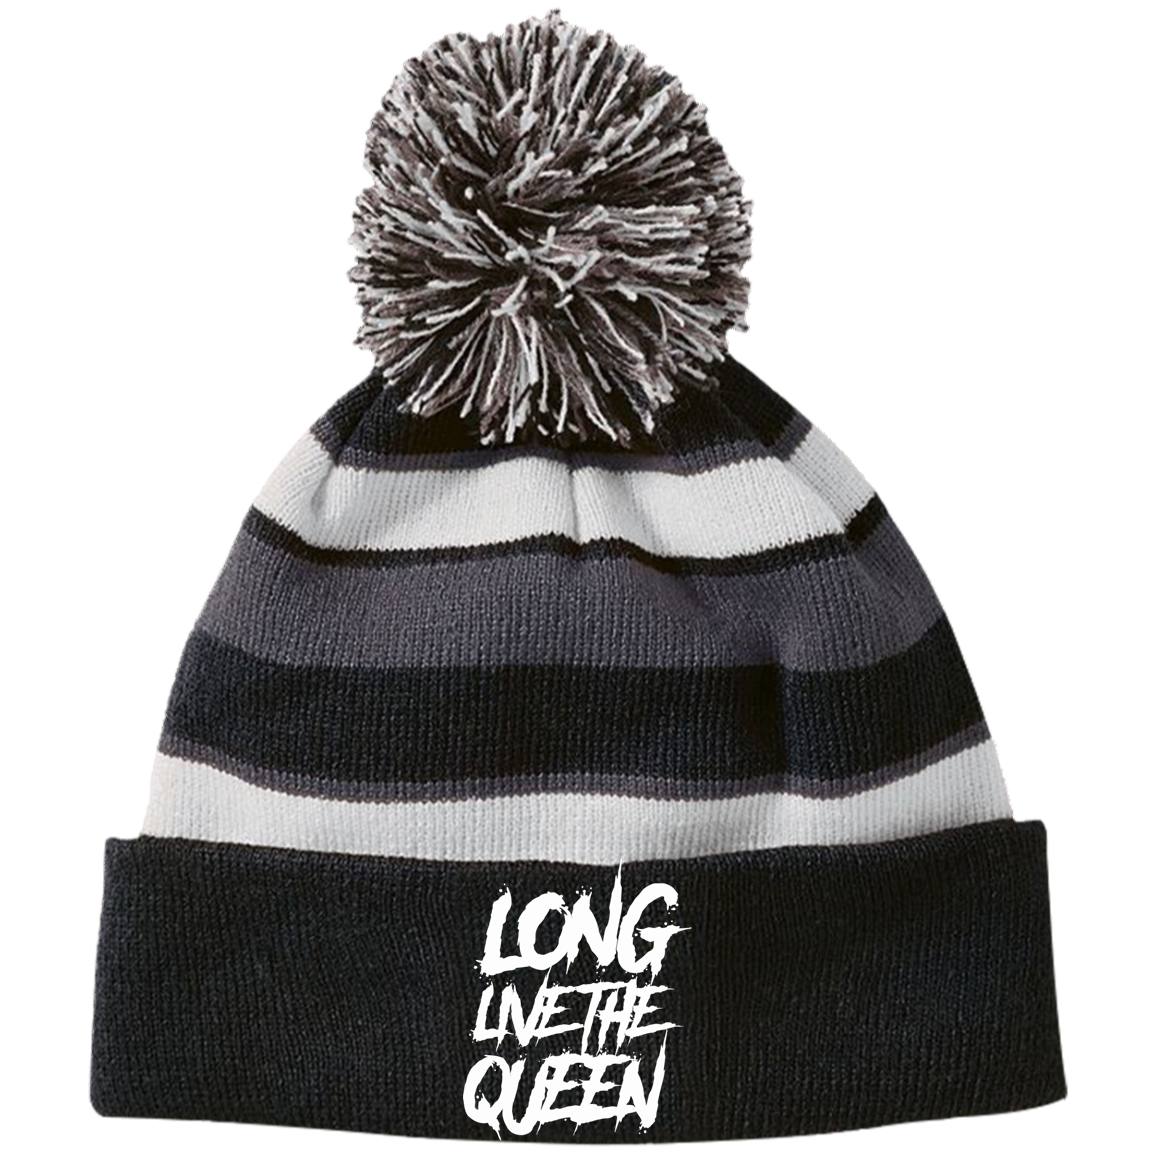 LONG LIVE THE QUEEN Striped Beanie with Pom